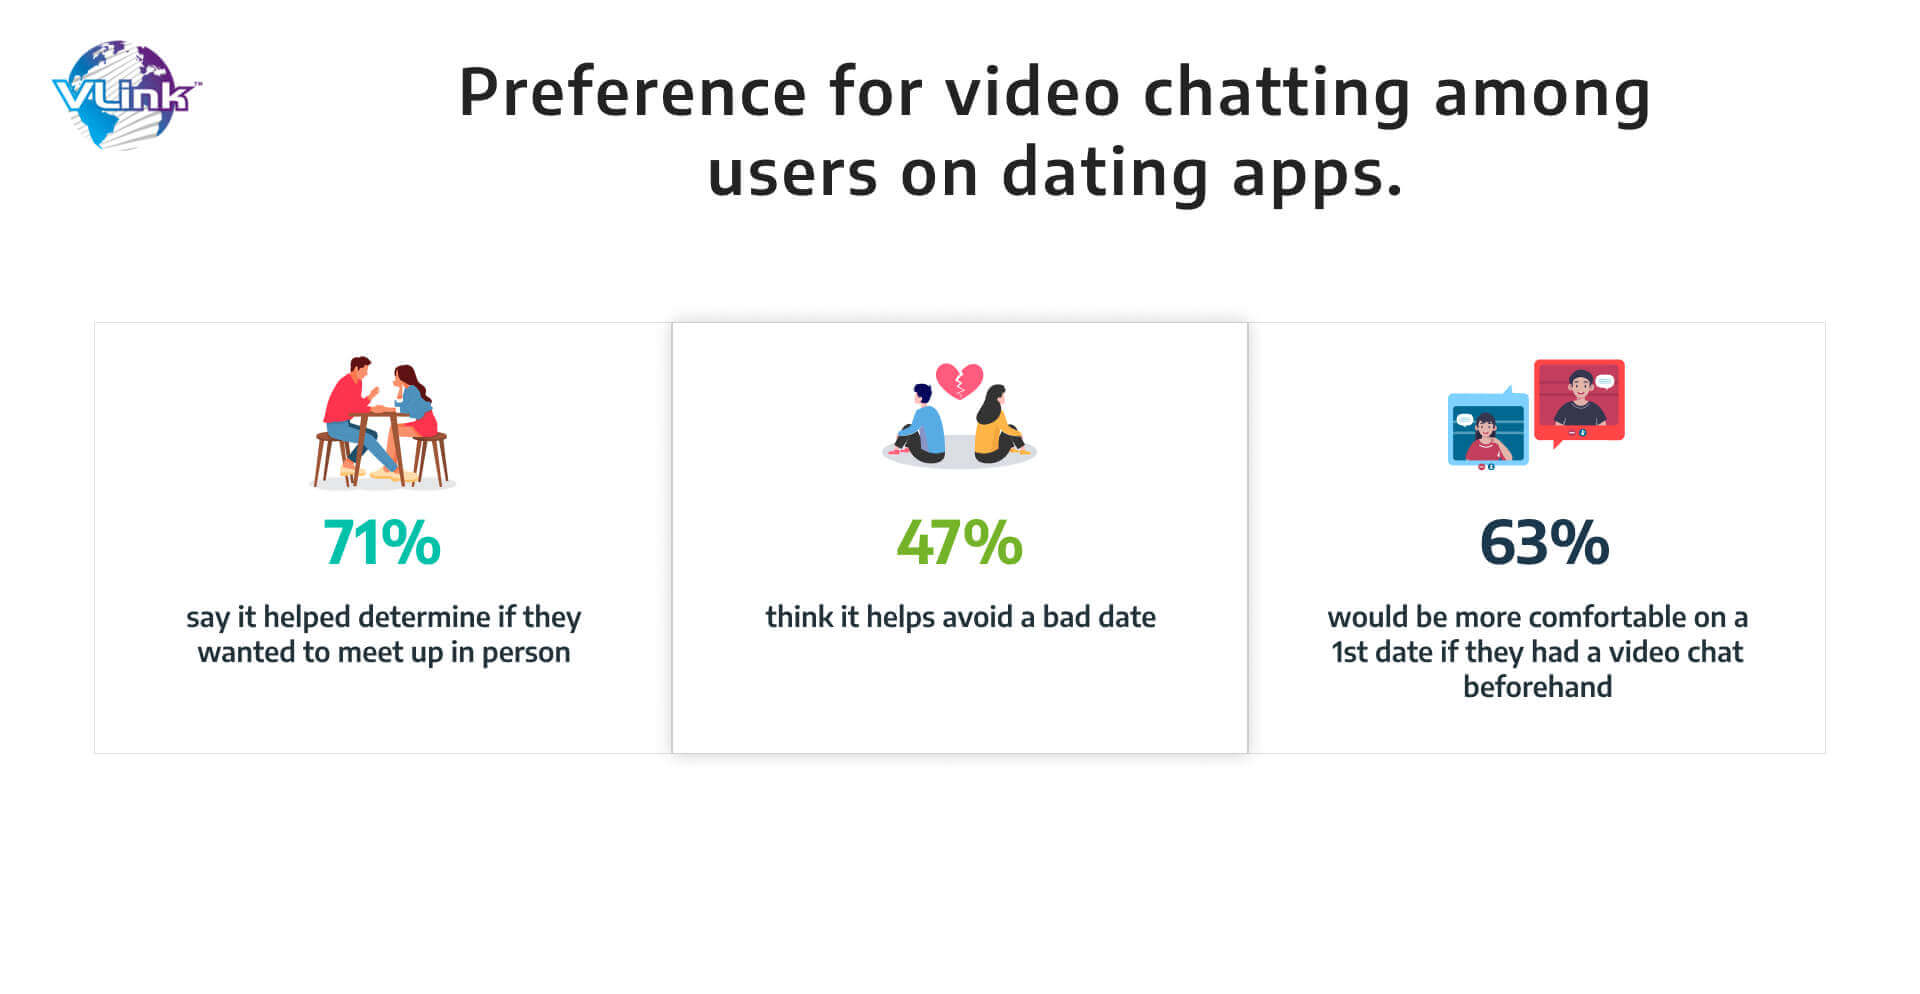 Preference for video chatting among users on dating apps